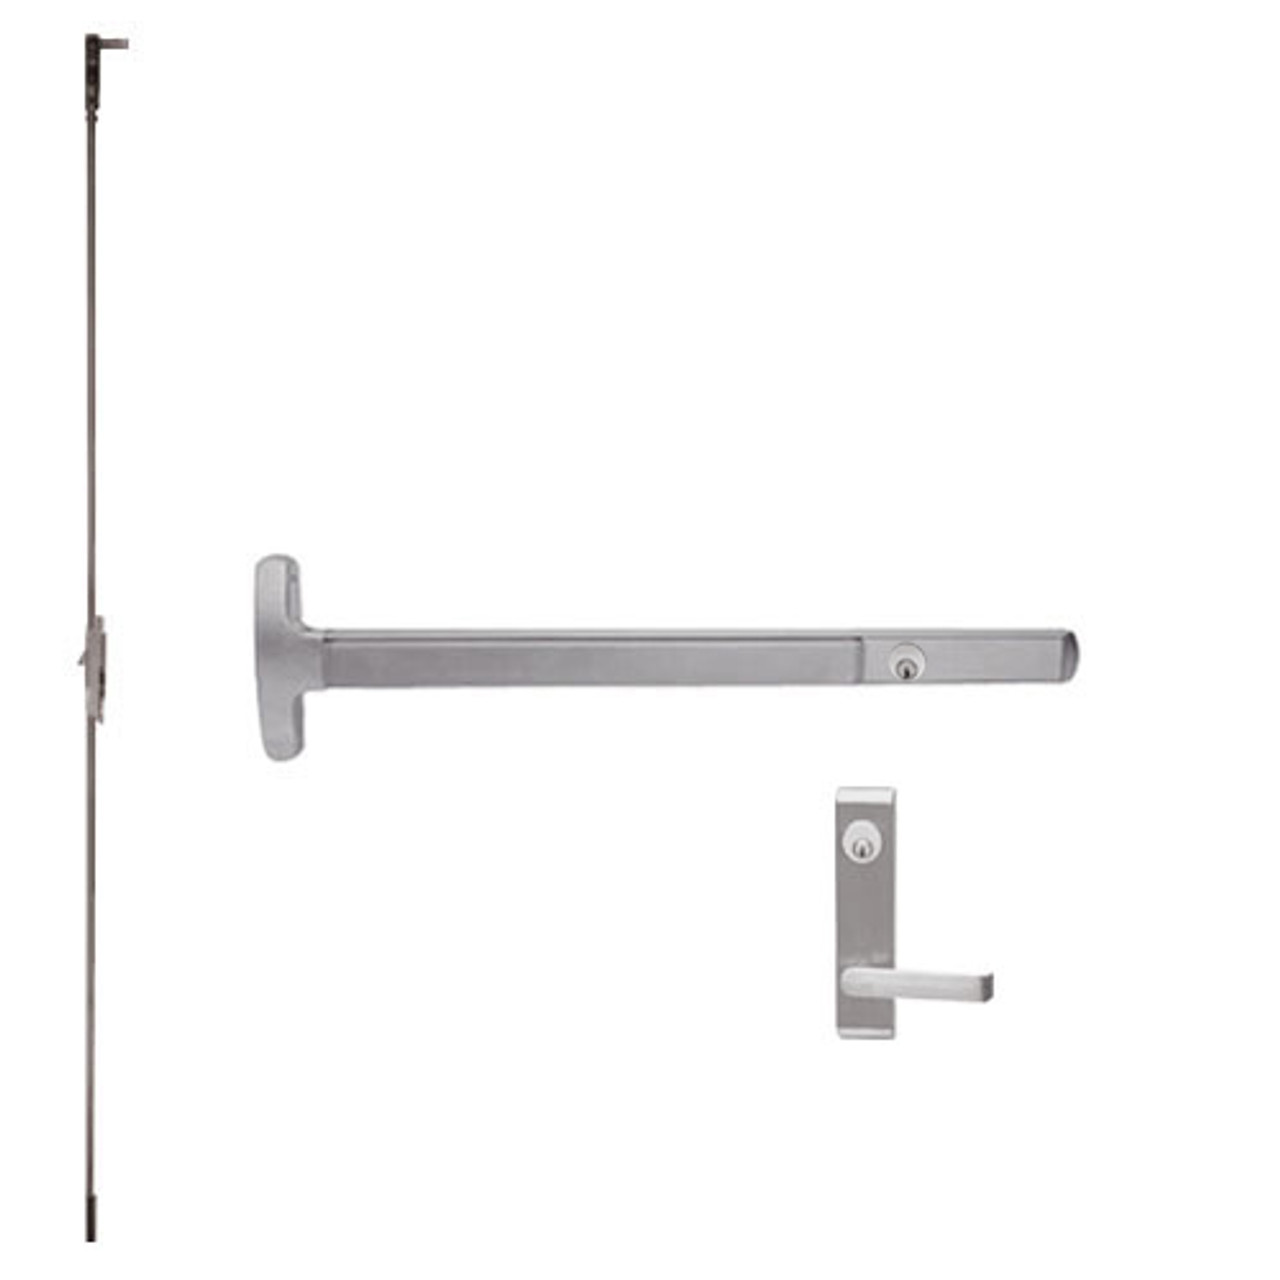 CD24-C-L-DANE-US32D-4-RHR Falcon Exit Device in Satin Stainless Steel